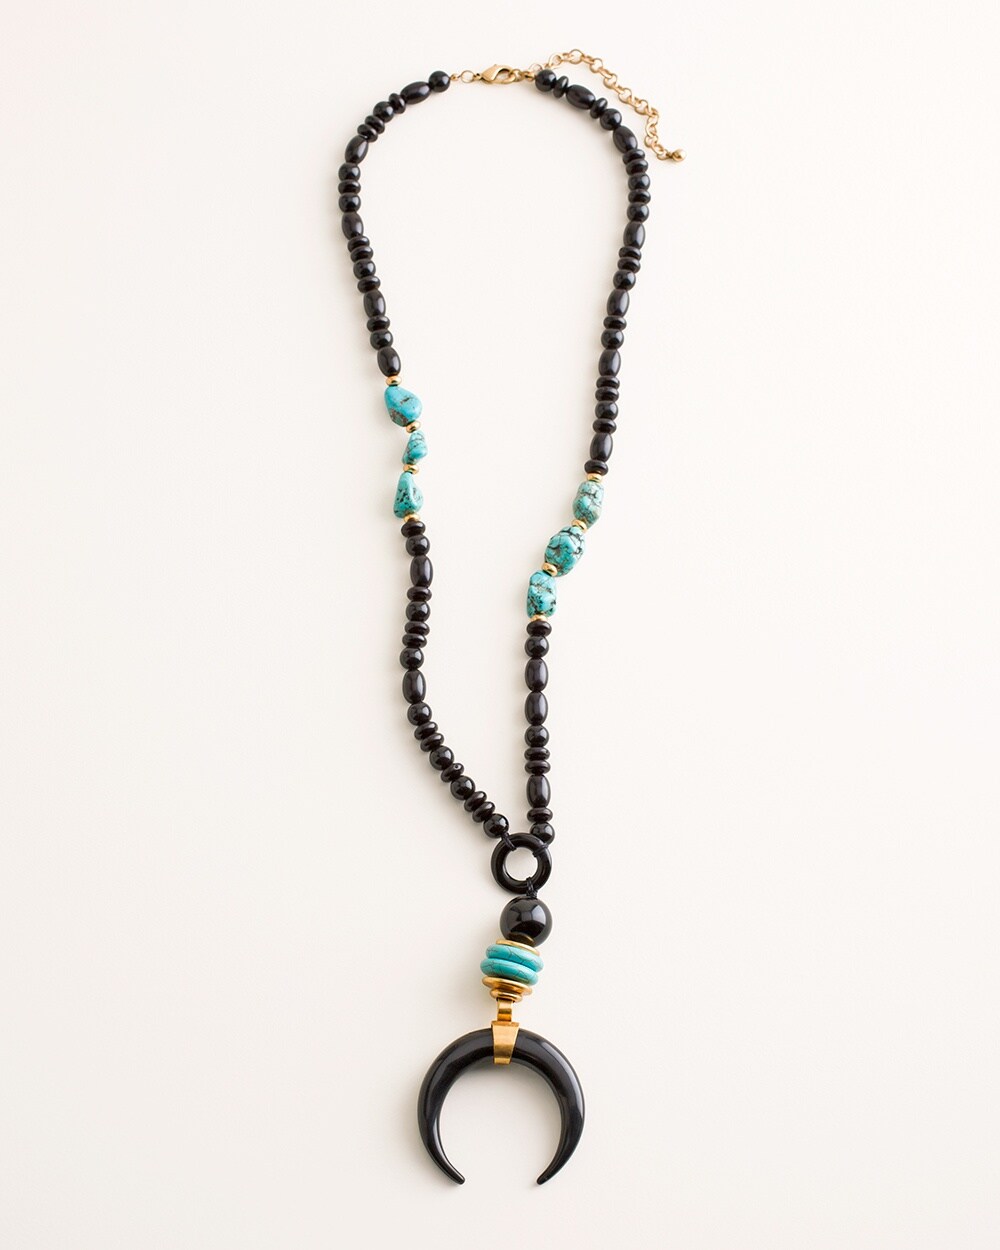 Black and Simulated Turquoise Pendant Necklace